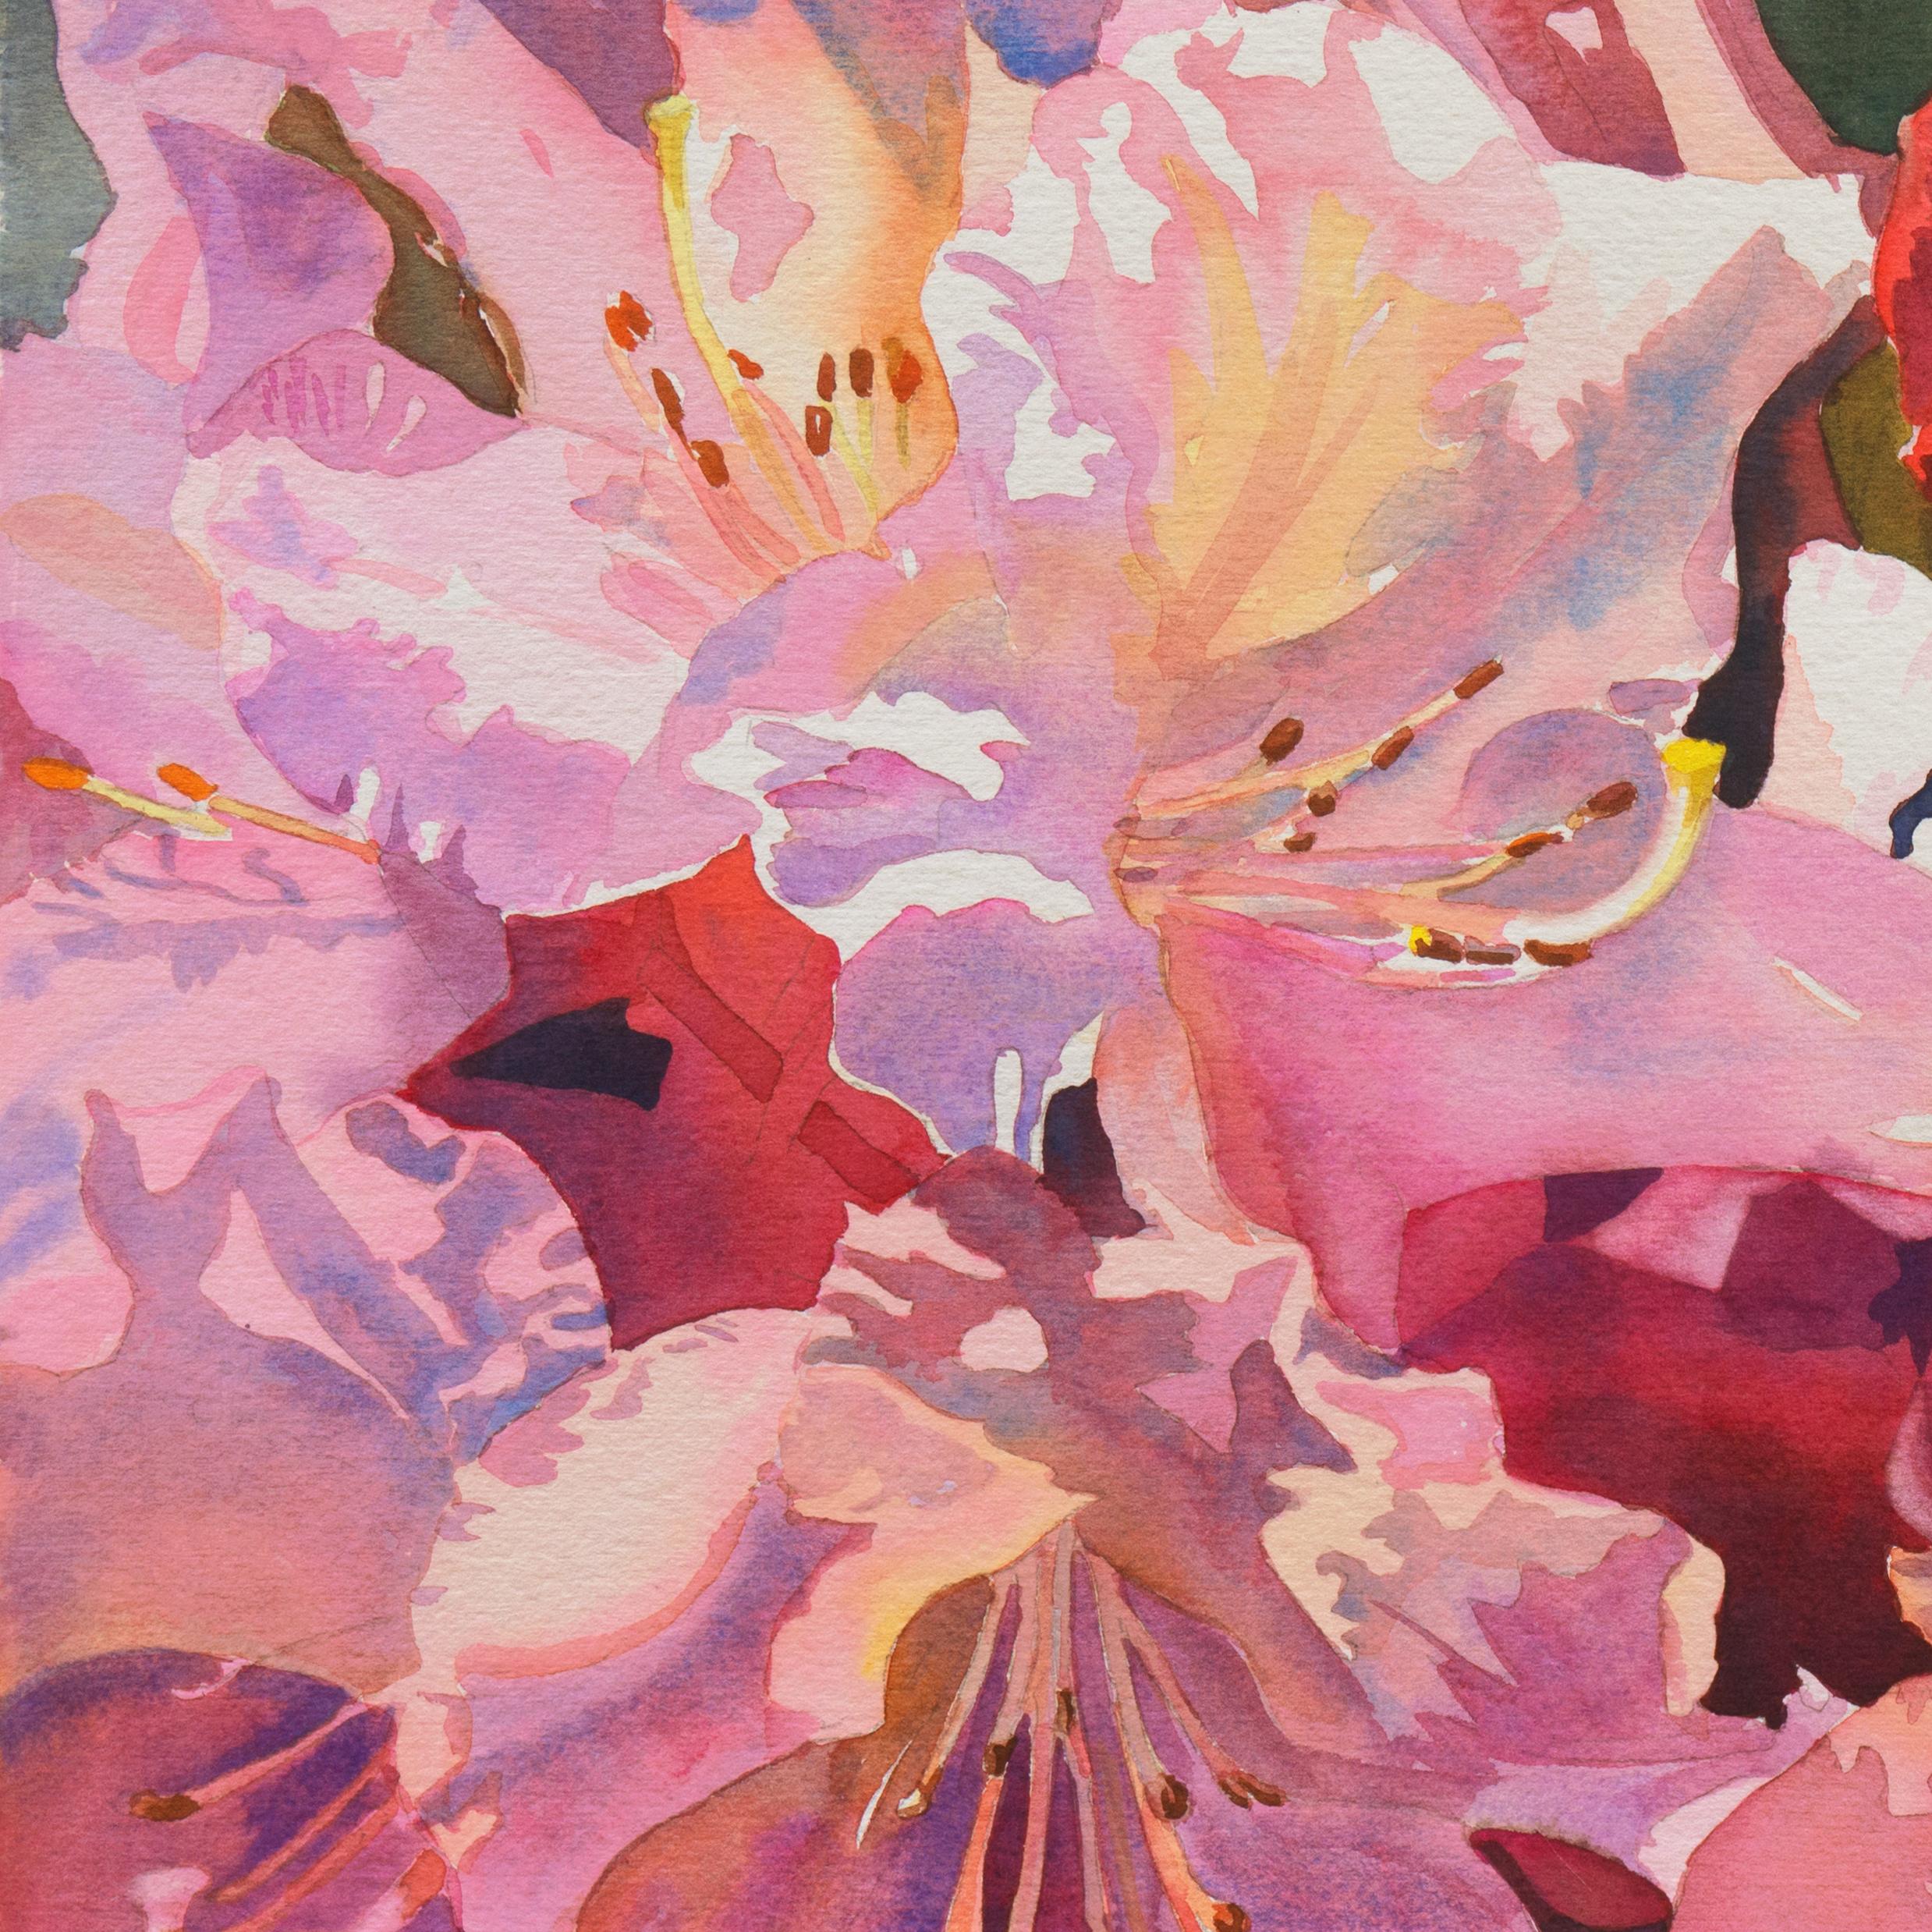 'Sisters Blushing', Lilies, National Watercolor Society - Contemporary Art by M. E. 'Mike' Bailey